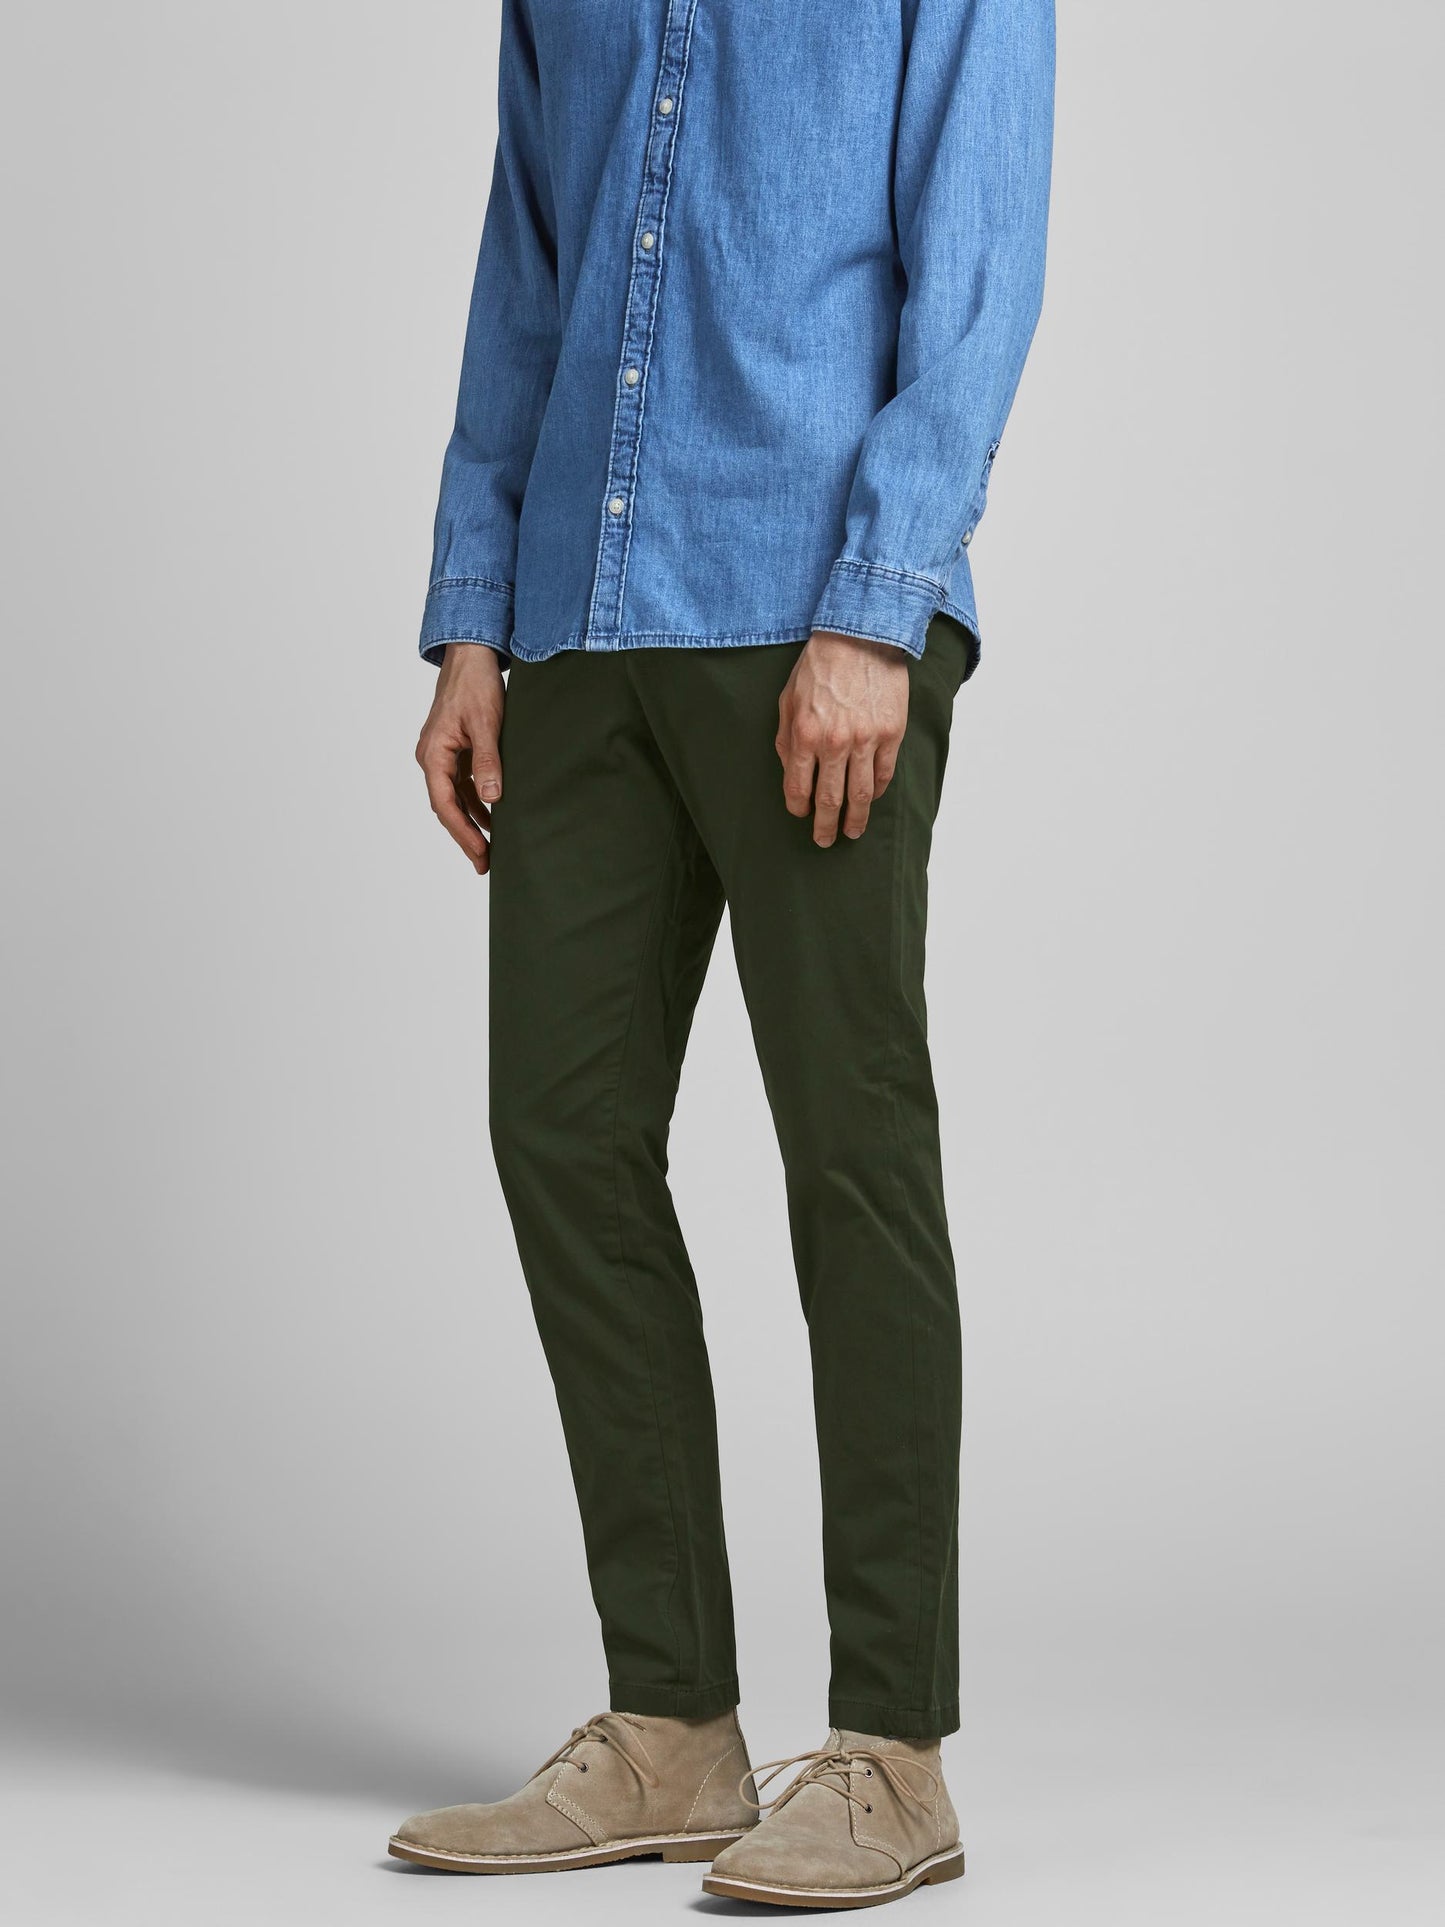 Pantalones Chinos Marco Bowie - Verde